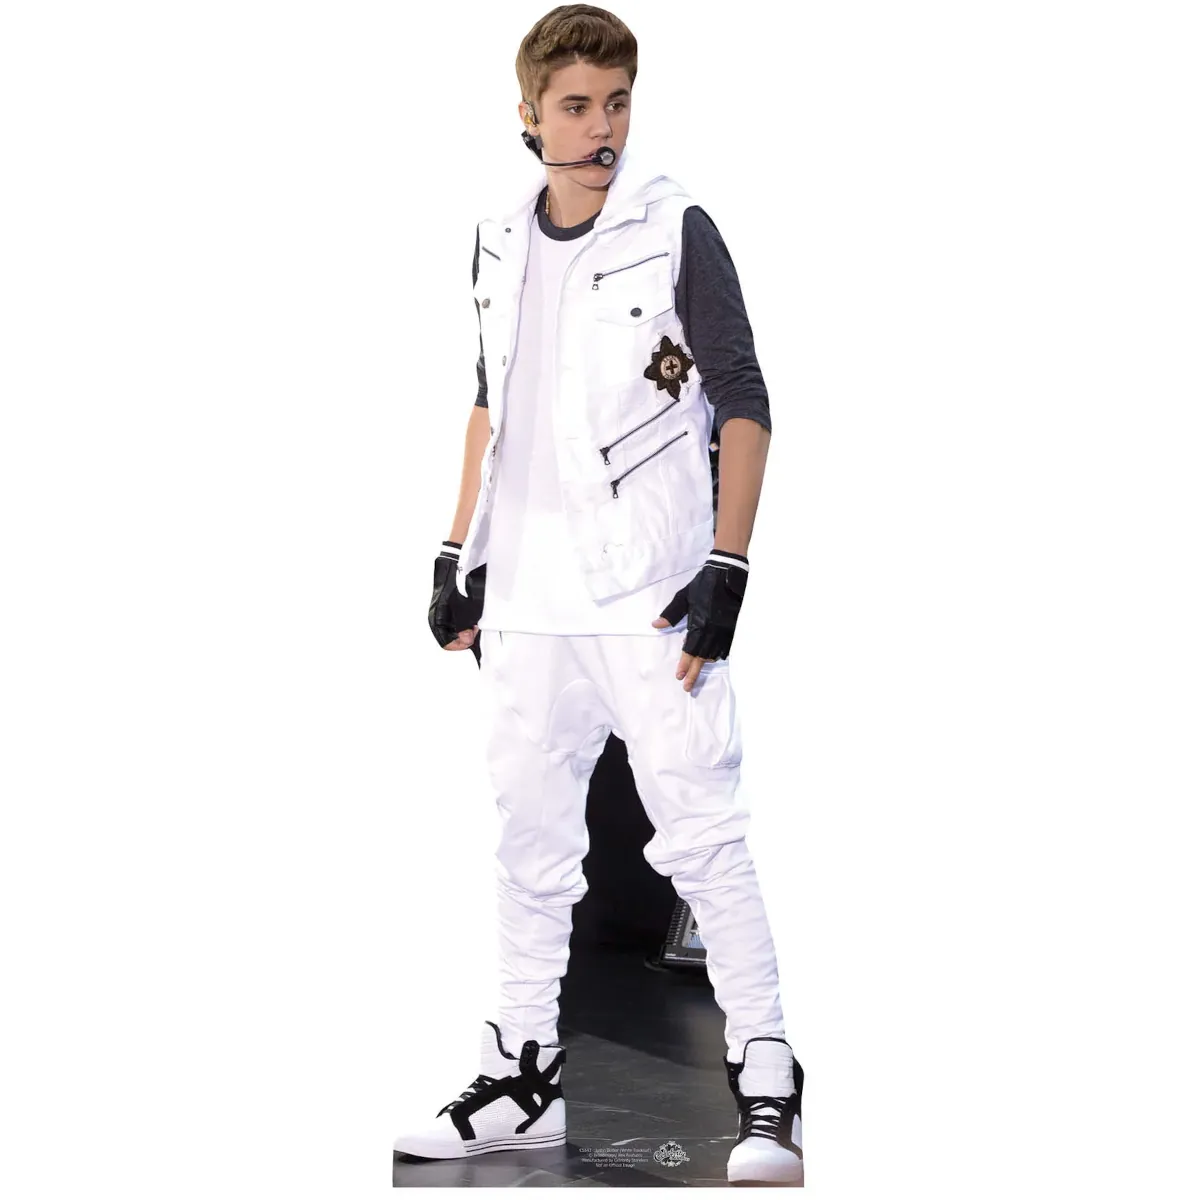 CS543 Justin Bieber 'White Tracksuit' (Canadian Singer) Lifesize Cardboard Cutout Standee Front